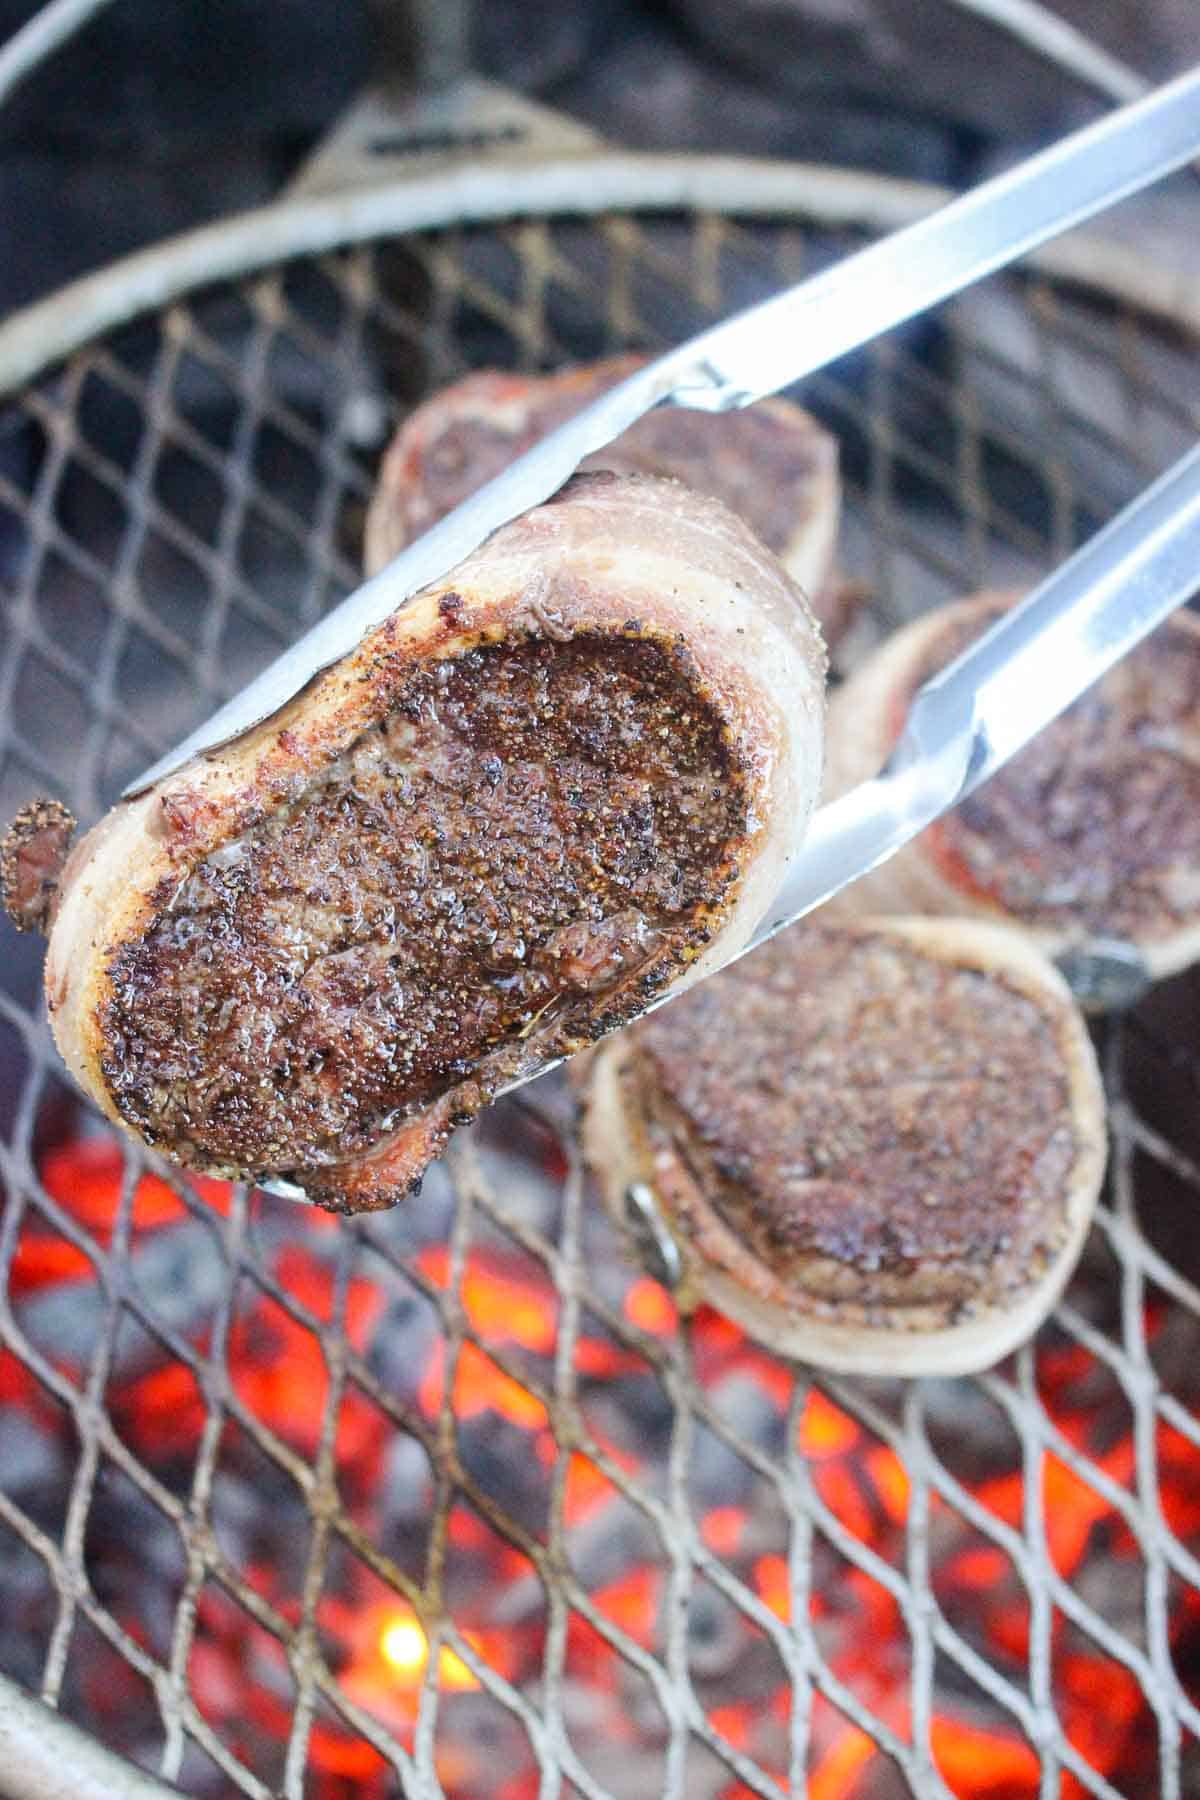 A close up of a grilled filet mignon being flipped.